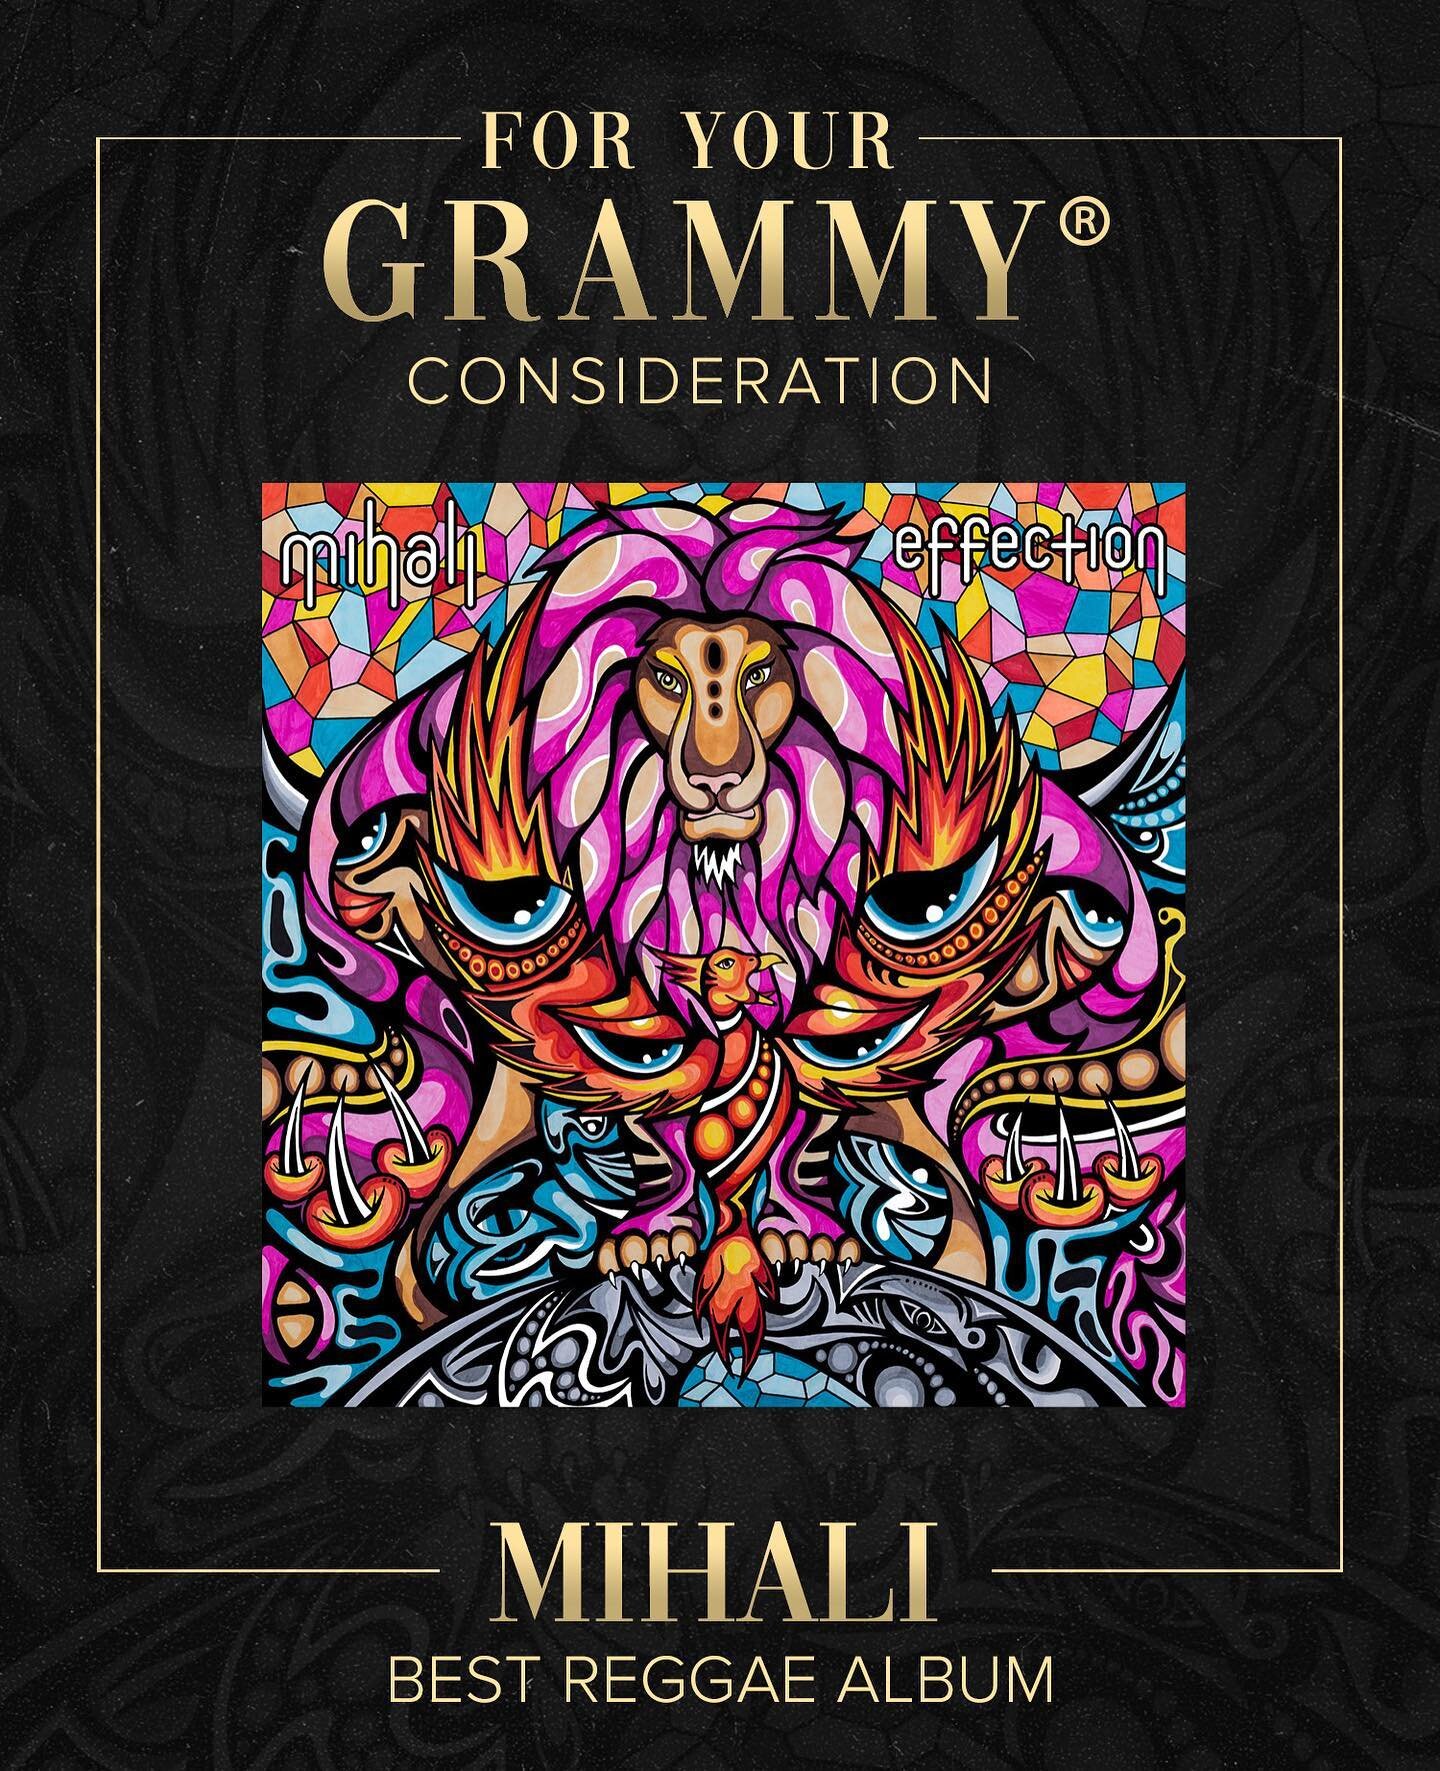 The First round of Grammy Voting begins today! #ForYourConsideration #Grammys

Big ups to everyone who worked on the record with me:
@nathan_aurora @e_n_young @iration @chadwickstokes @themovementvibe @theelovaters @jacobhemphillofficial @sojagram @k